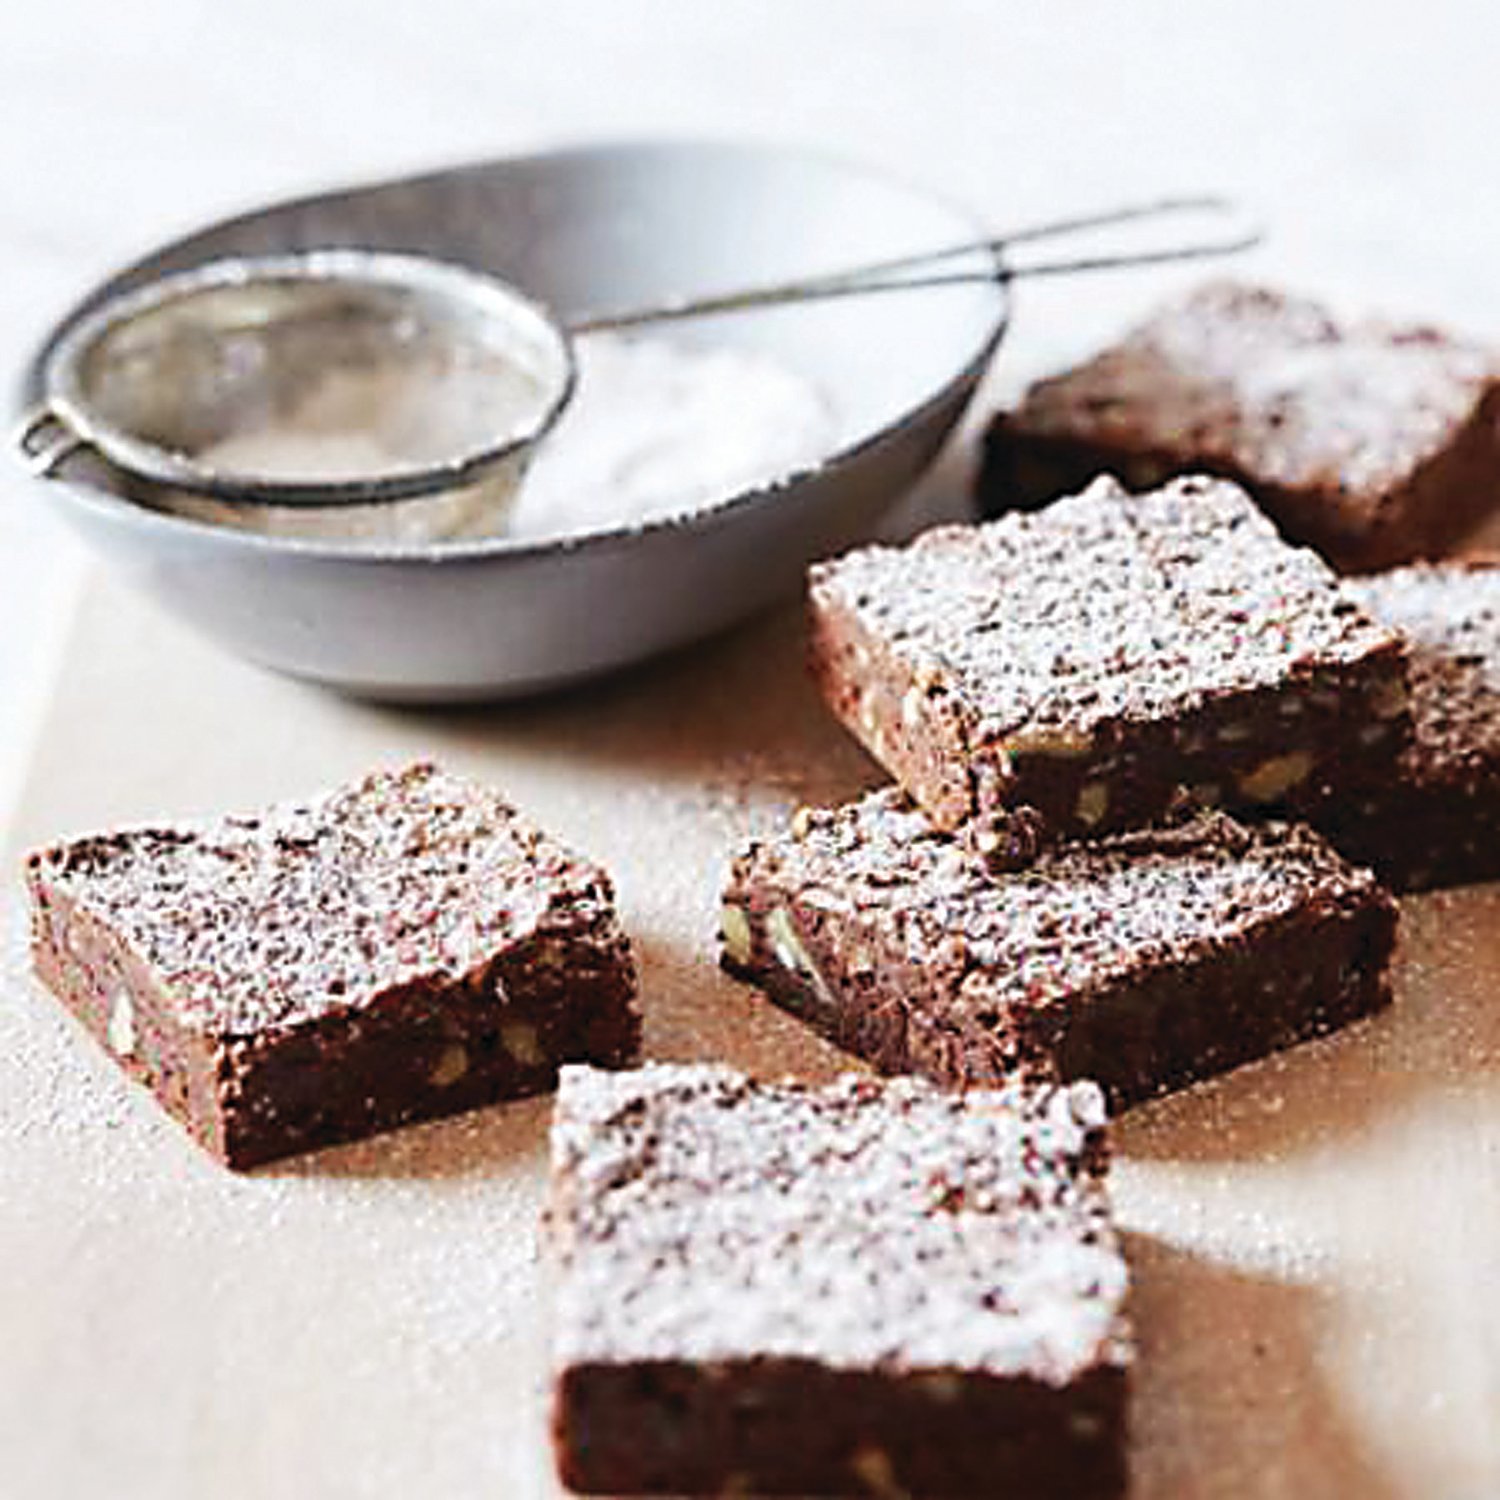 This chewy brownie recipe from Nestle is rich and moist, with good cocoa flavor.